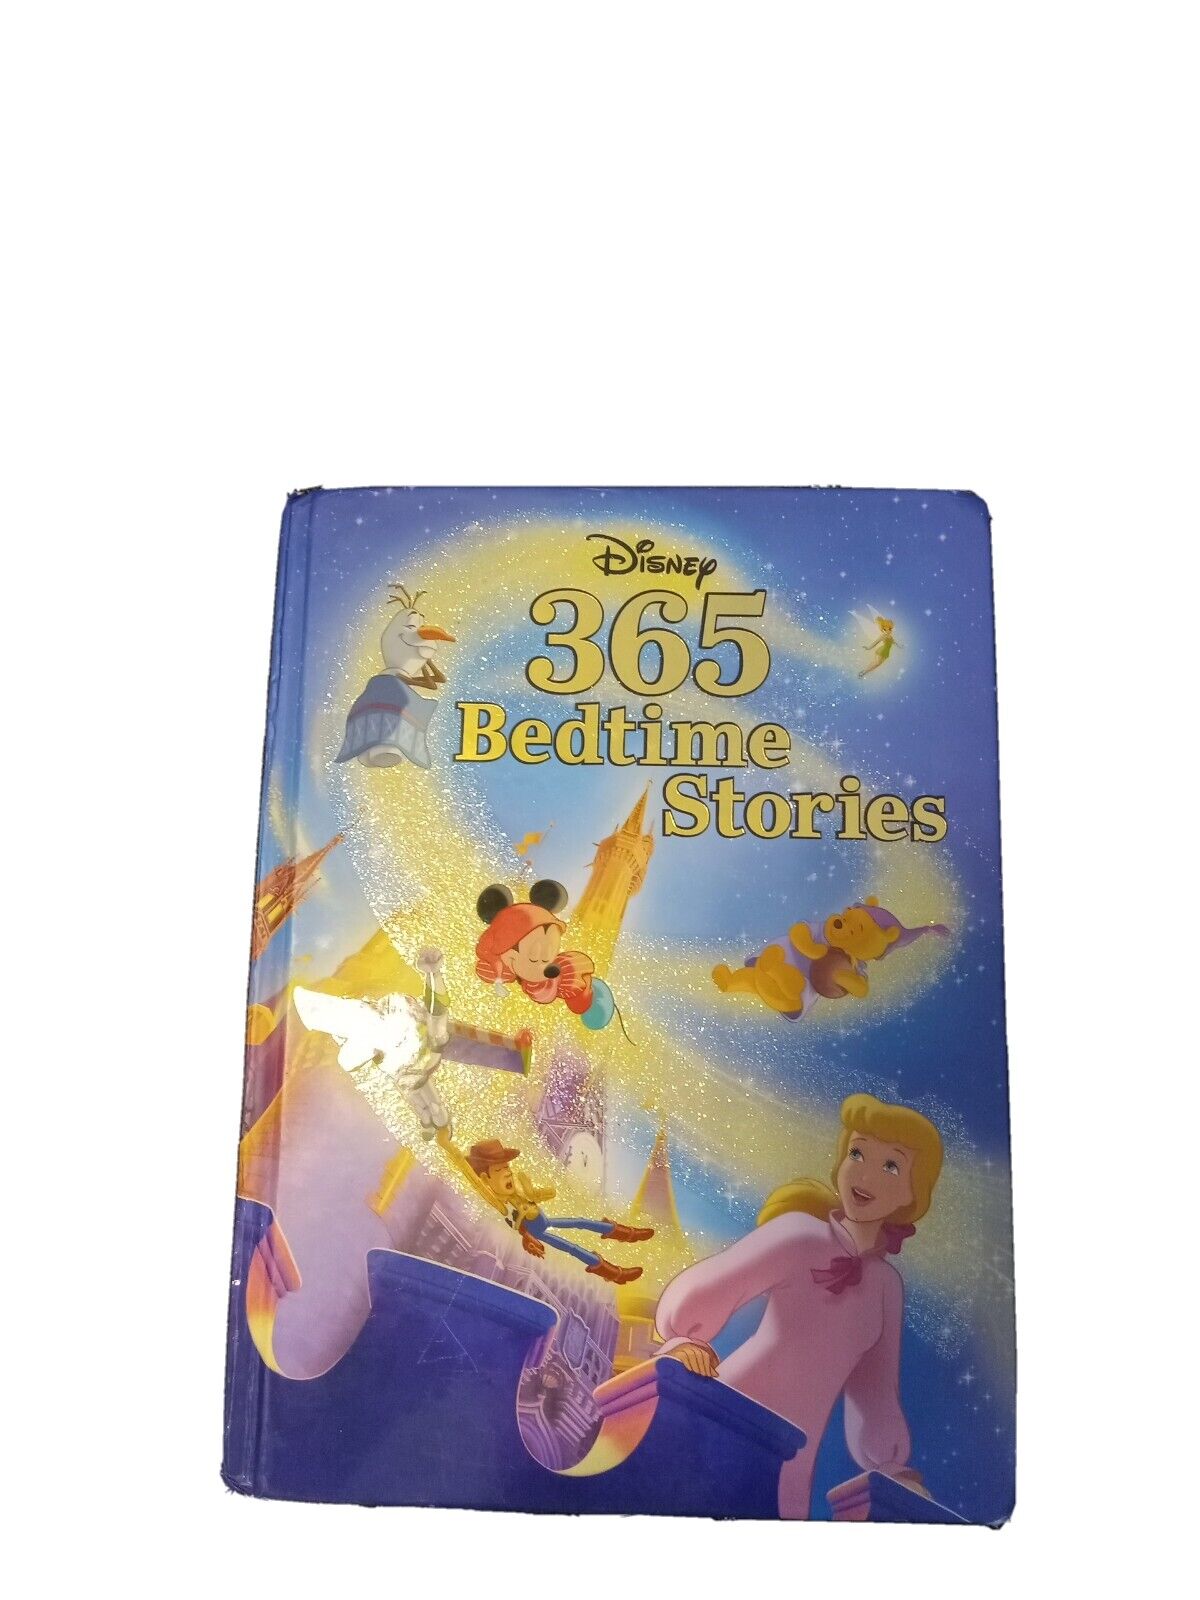 Disney 365 Bedtime Stories. A short bedtime story for every day of the year.